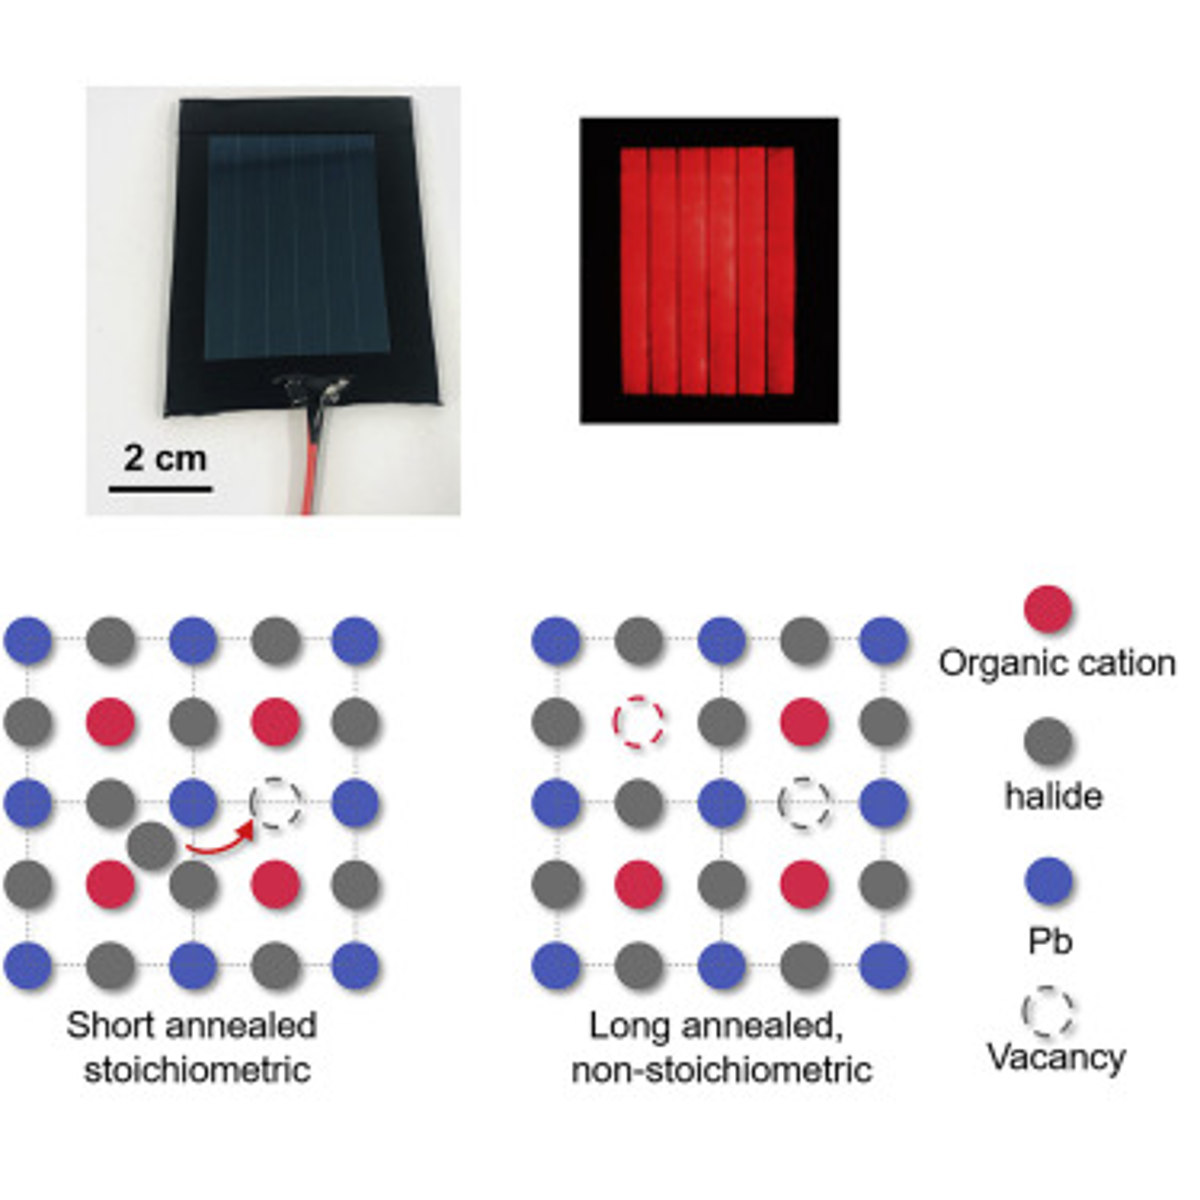 Reduced Self-Doping of Perovskites Induced by Short Annealing for Efficient Solar Modules image